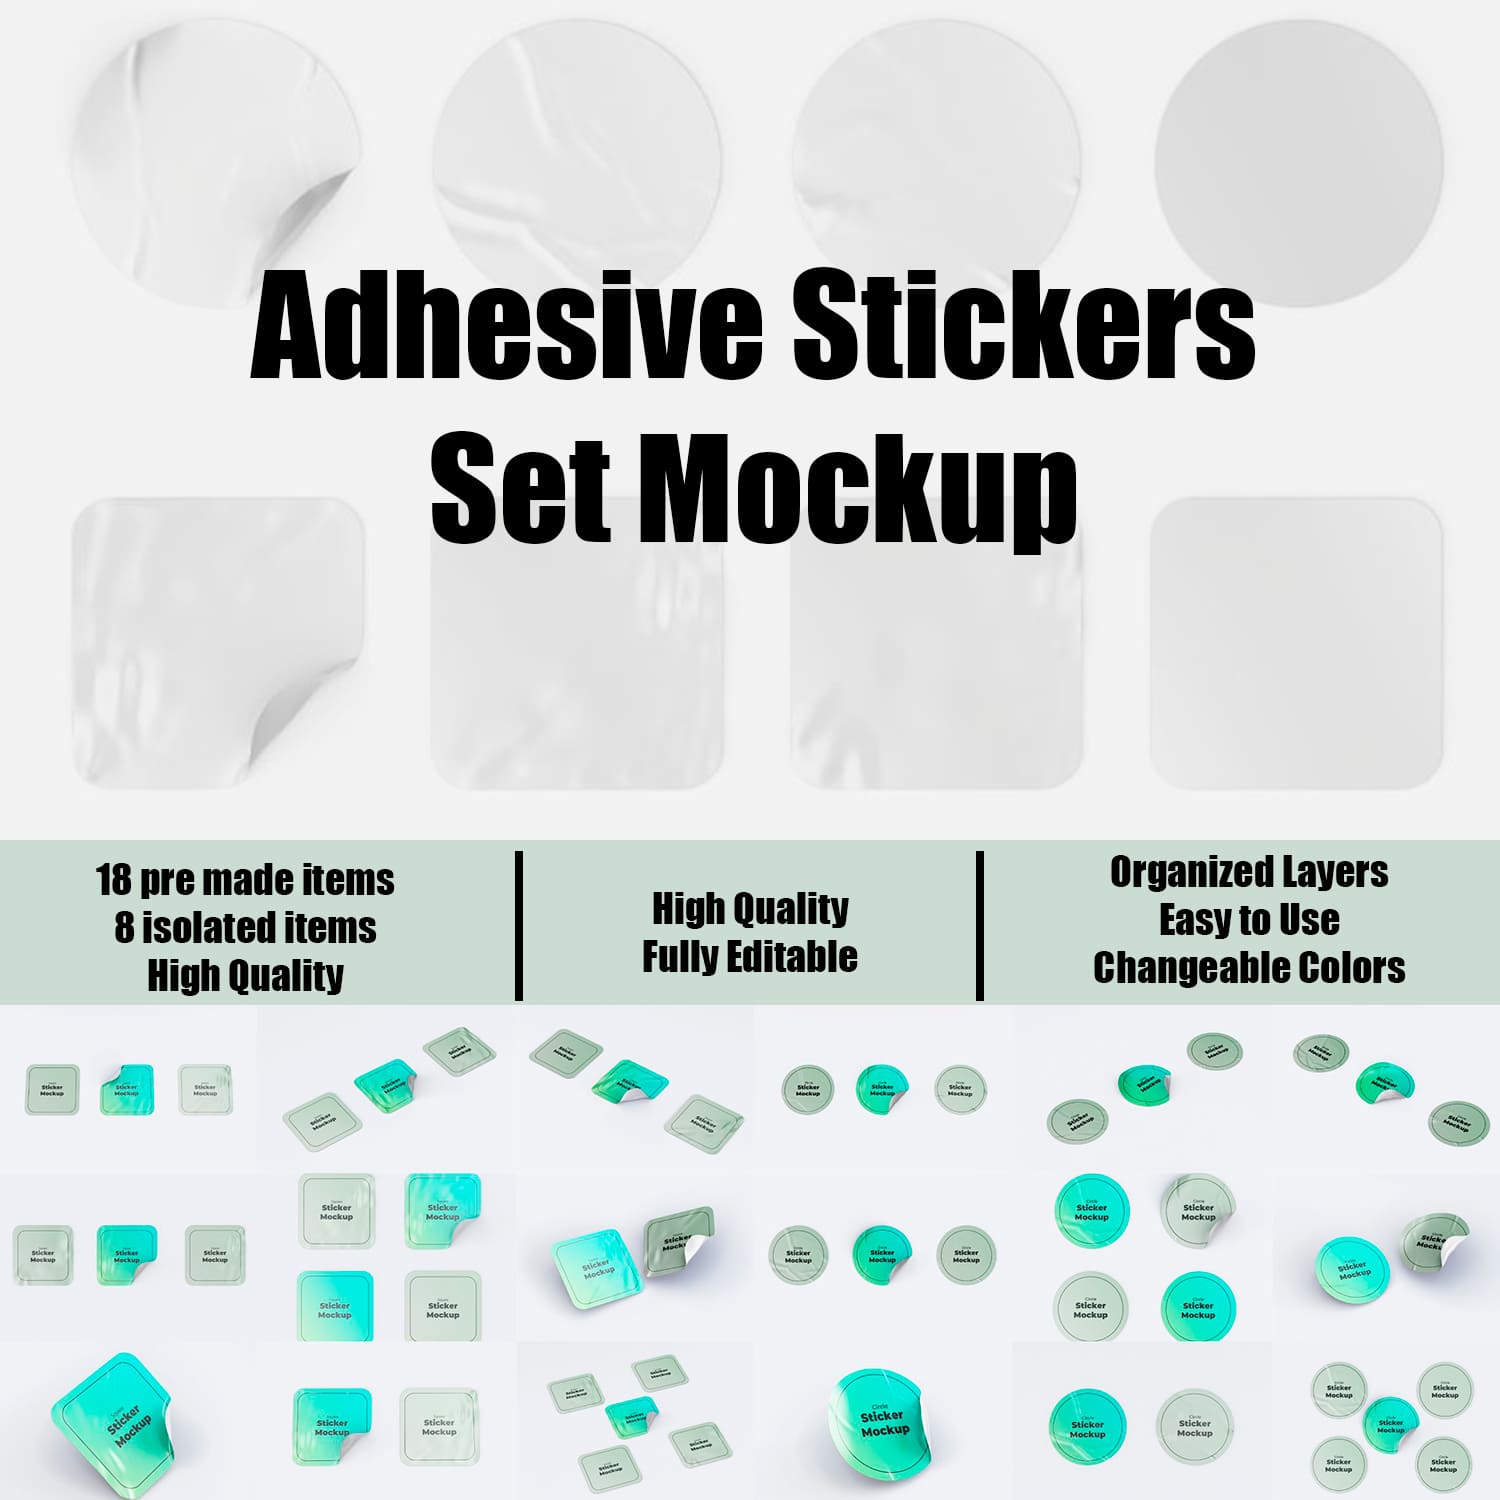 Collection of images of adorable sticker mockups.